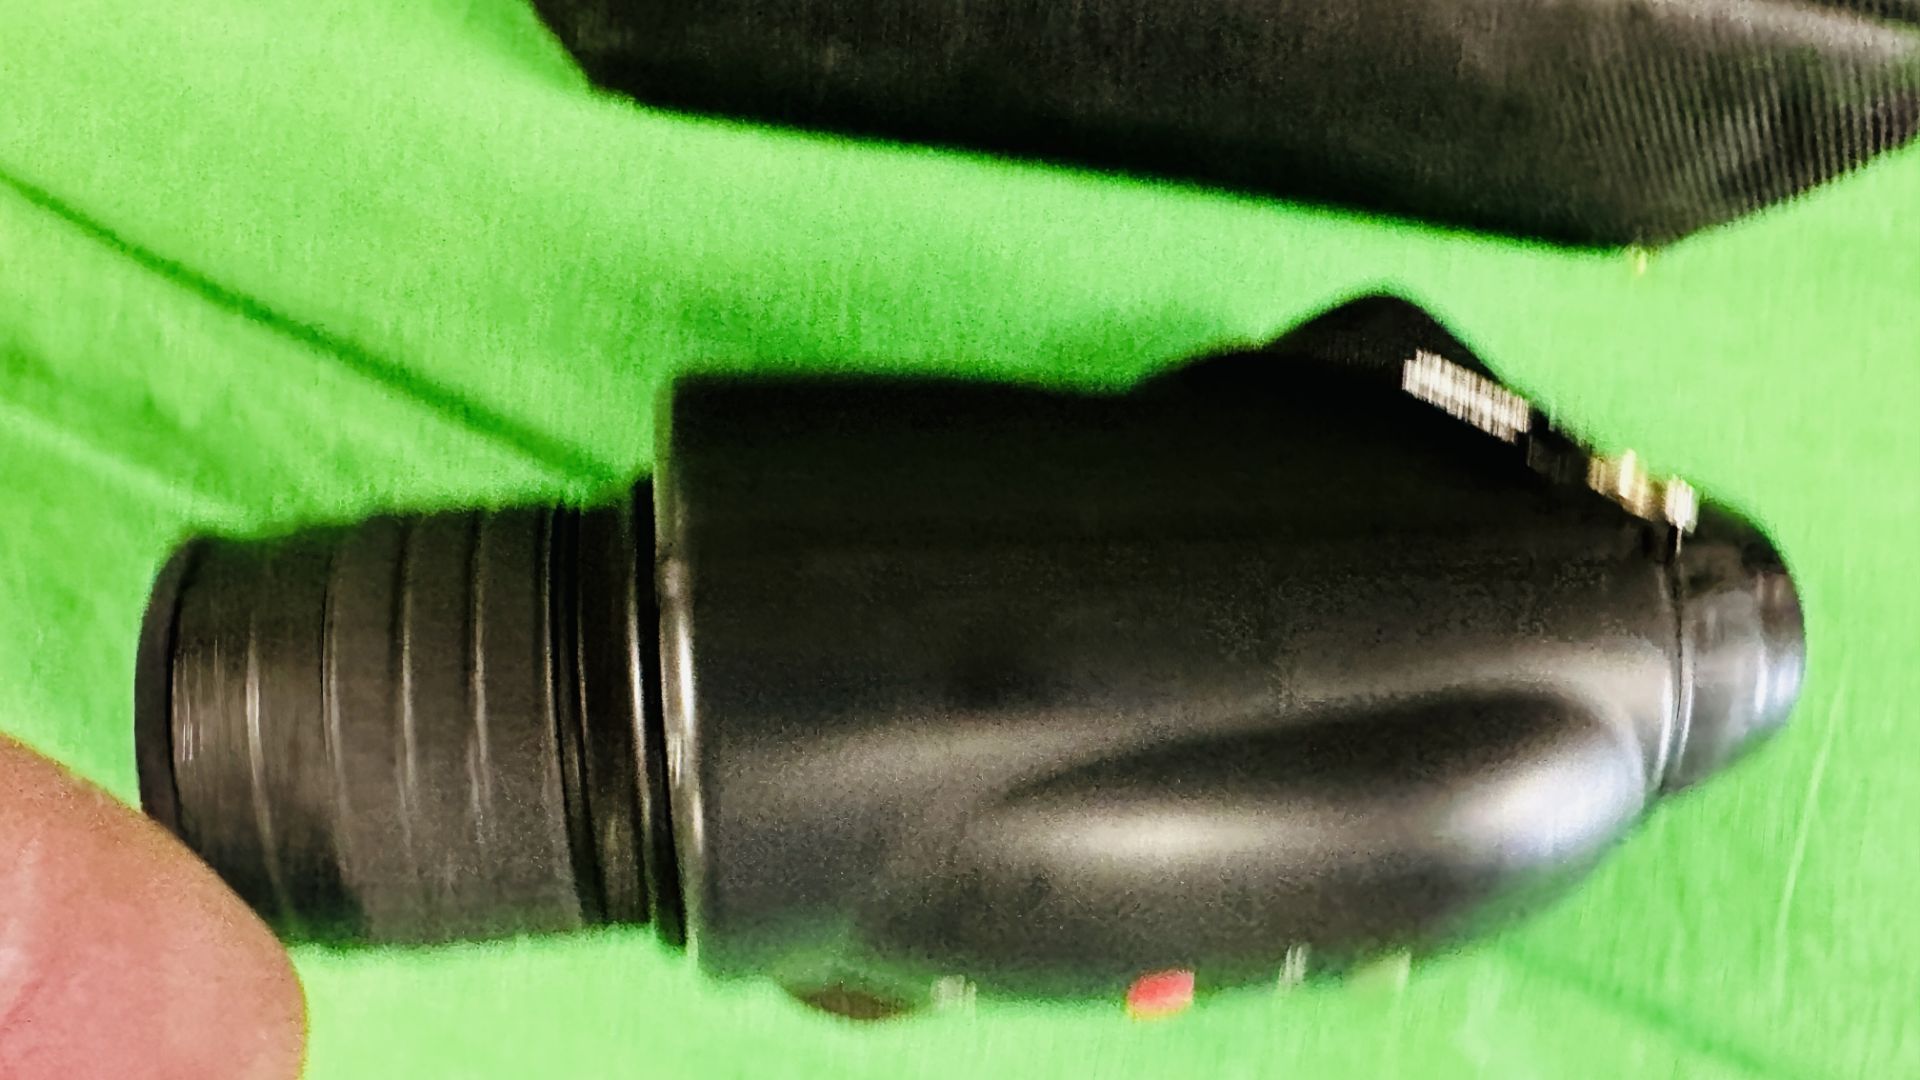 A NEWCON NIGHT VISION SCOPE IN CASE. - Image 2 of 5